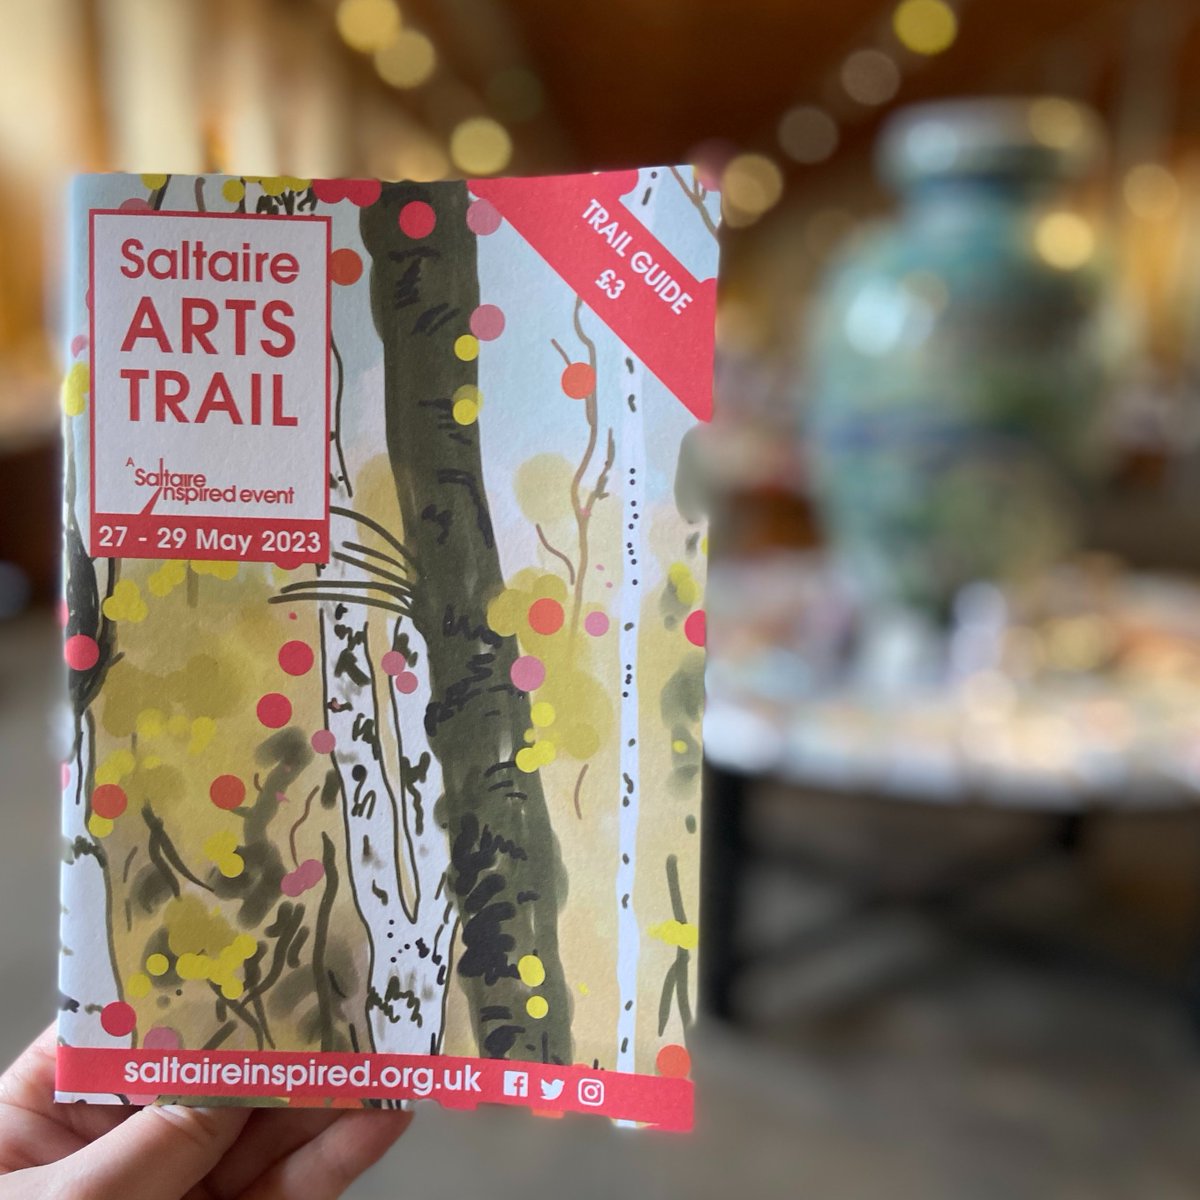 The @SaltaireArt  Saltaire Arts Trail 2023 Guides are here! The Arts Trail runs Sat 27 - Mon 29 May. It's a wonderful village-wide event. We're back open tomorrow, Wed 10th May from 10am - pop in, buy your guide from the 1853 gallery or bookshop & plan your Arts Trail weekend!